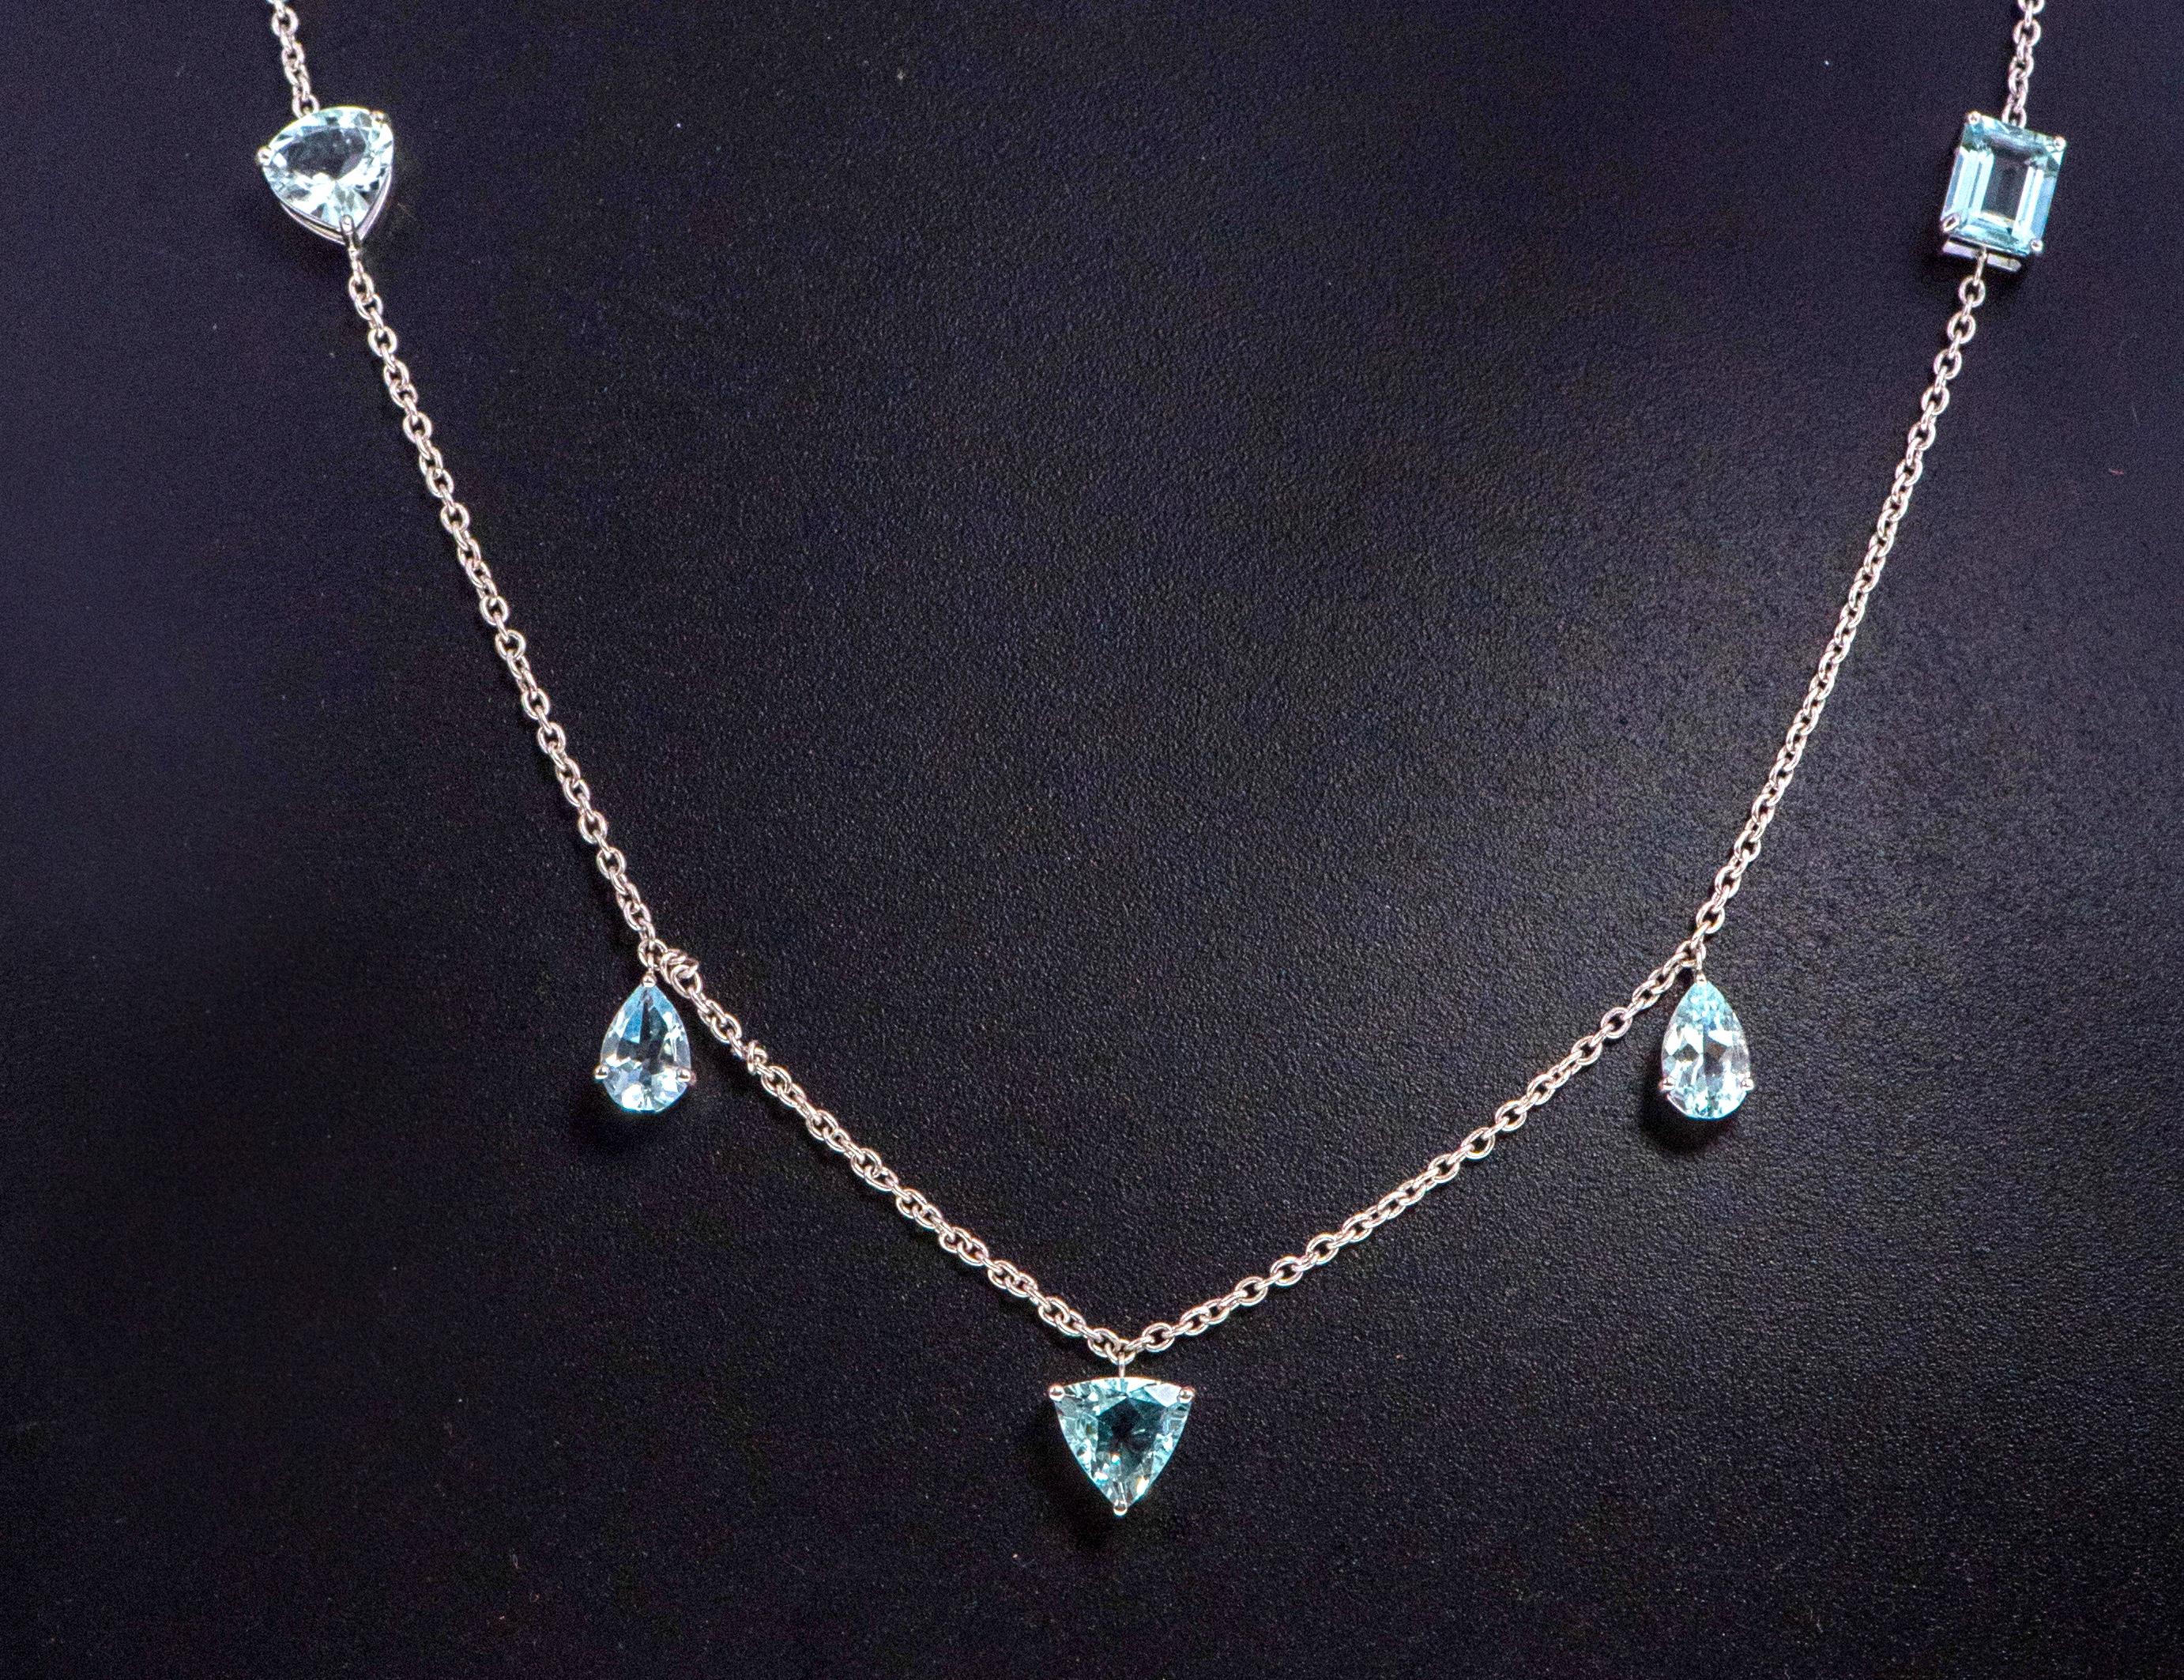 18 Karat White Gold 6.29 Carat Multi-Shape Aquamarine Drop Link Necklace

This phenomenal Santa Marina aquamarine hanging necklace is magical. The 9 mix shape solitaire aquamarines set in the combination of some within the link chain and some